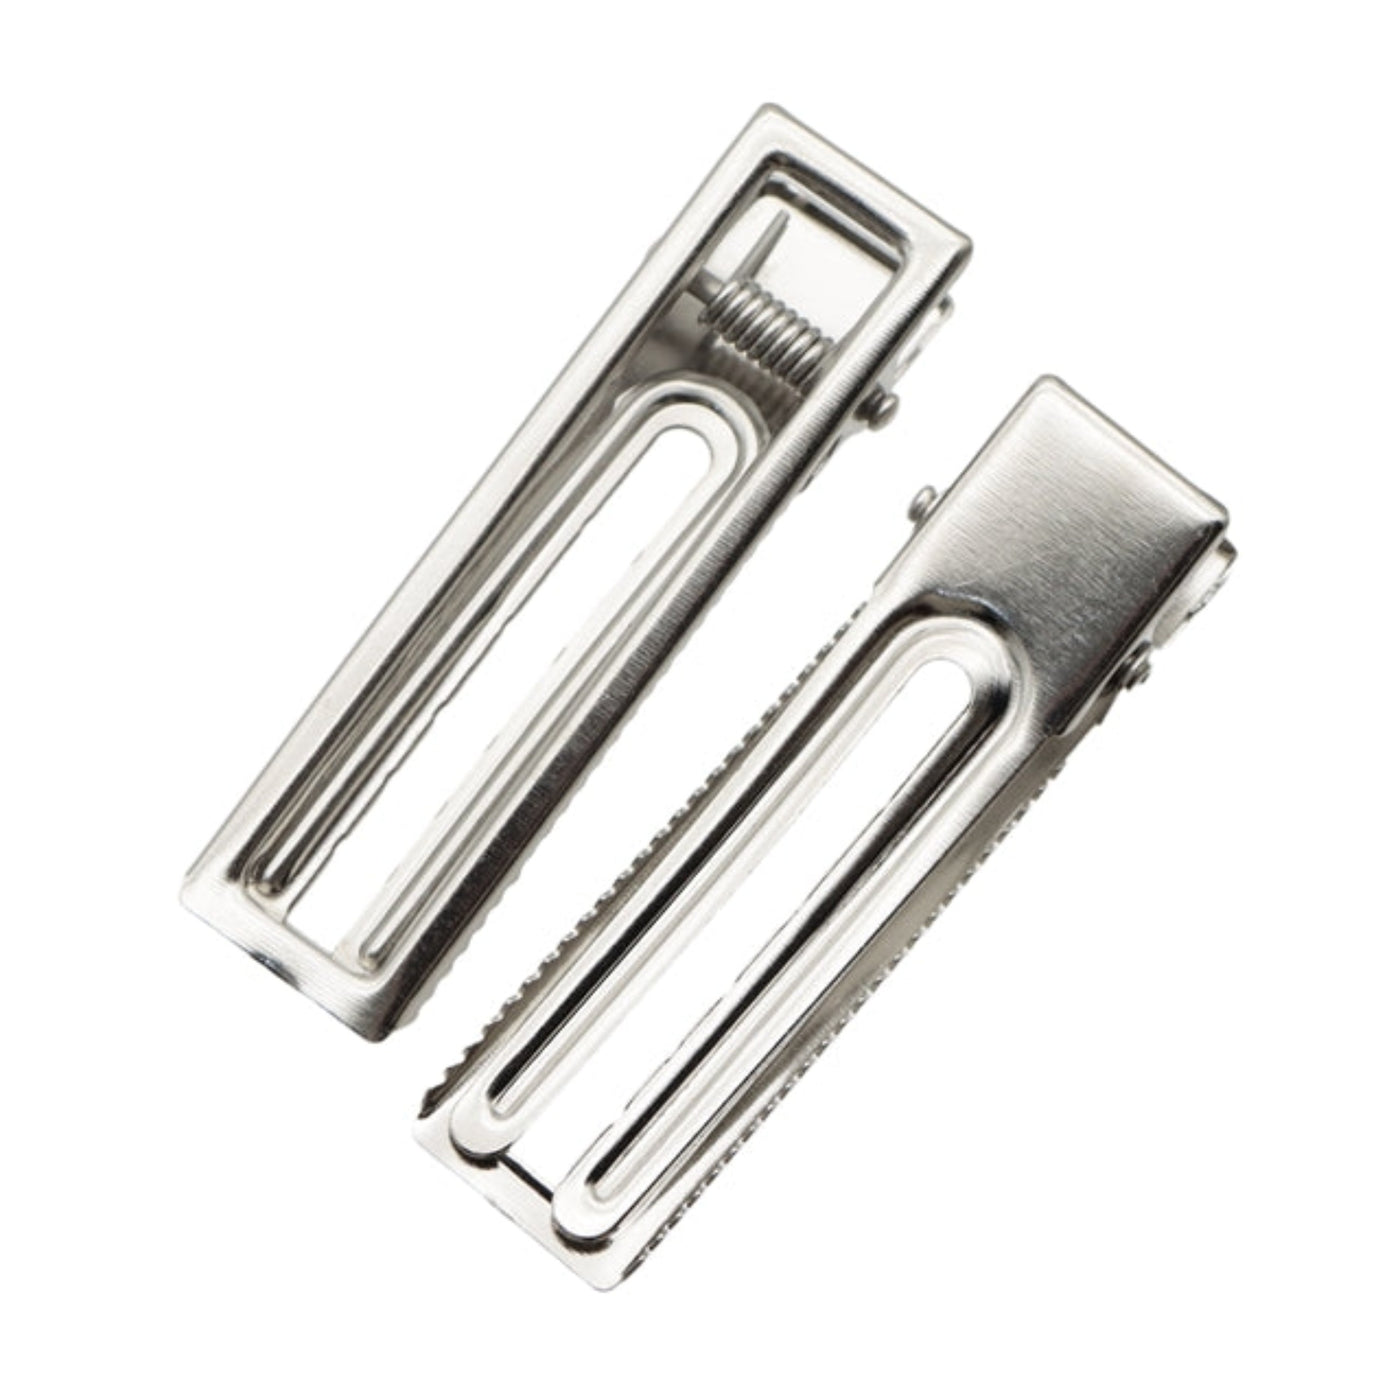 60mm x 16mm Silver Metal Hair Clips - 10 or 25 Pack